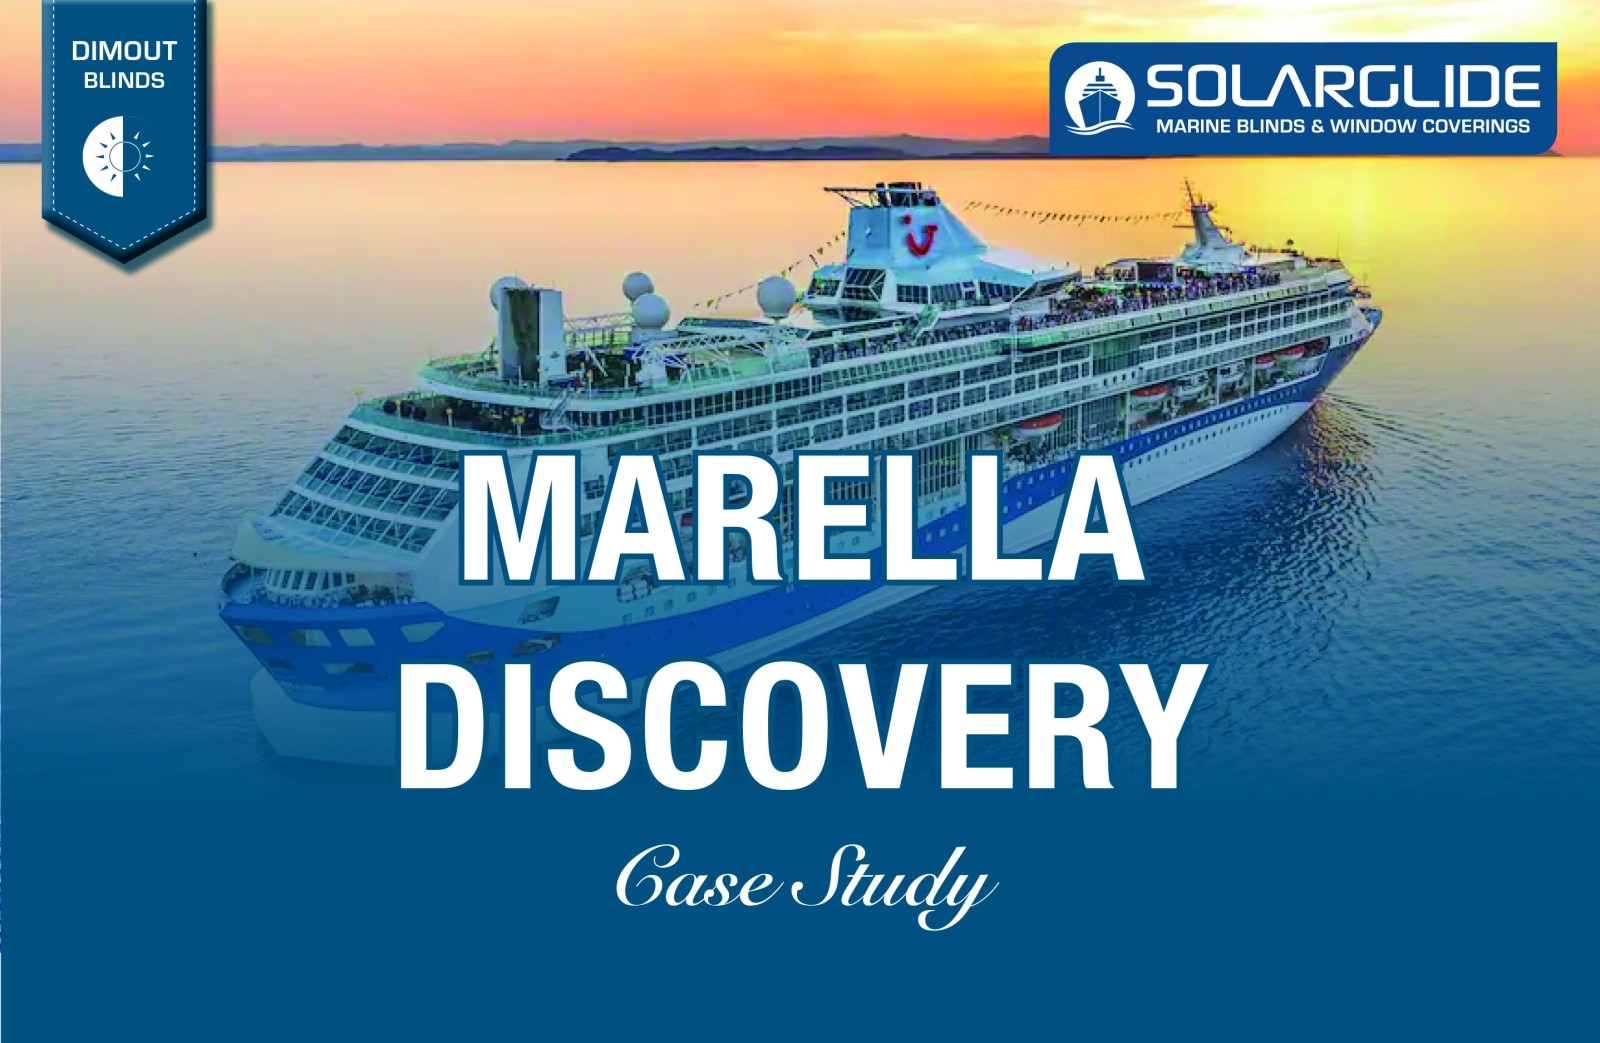 Solarglide Motorised Blackout blinds supplied to Marella Discovery cruise Liner